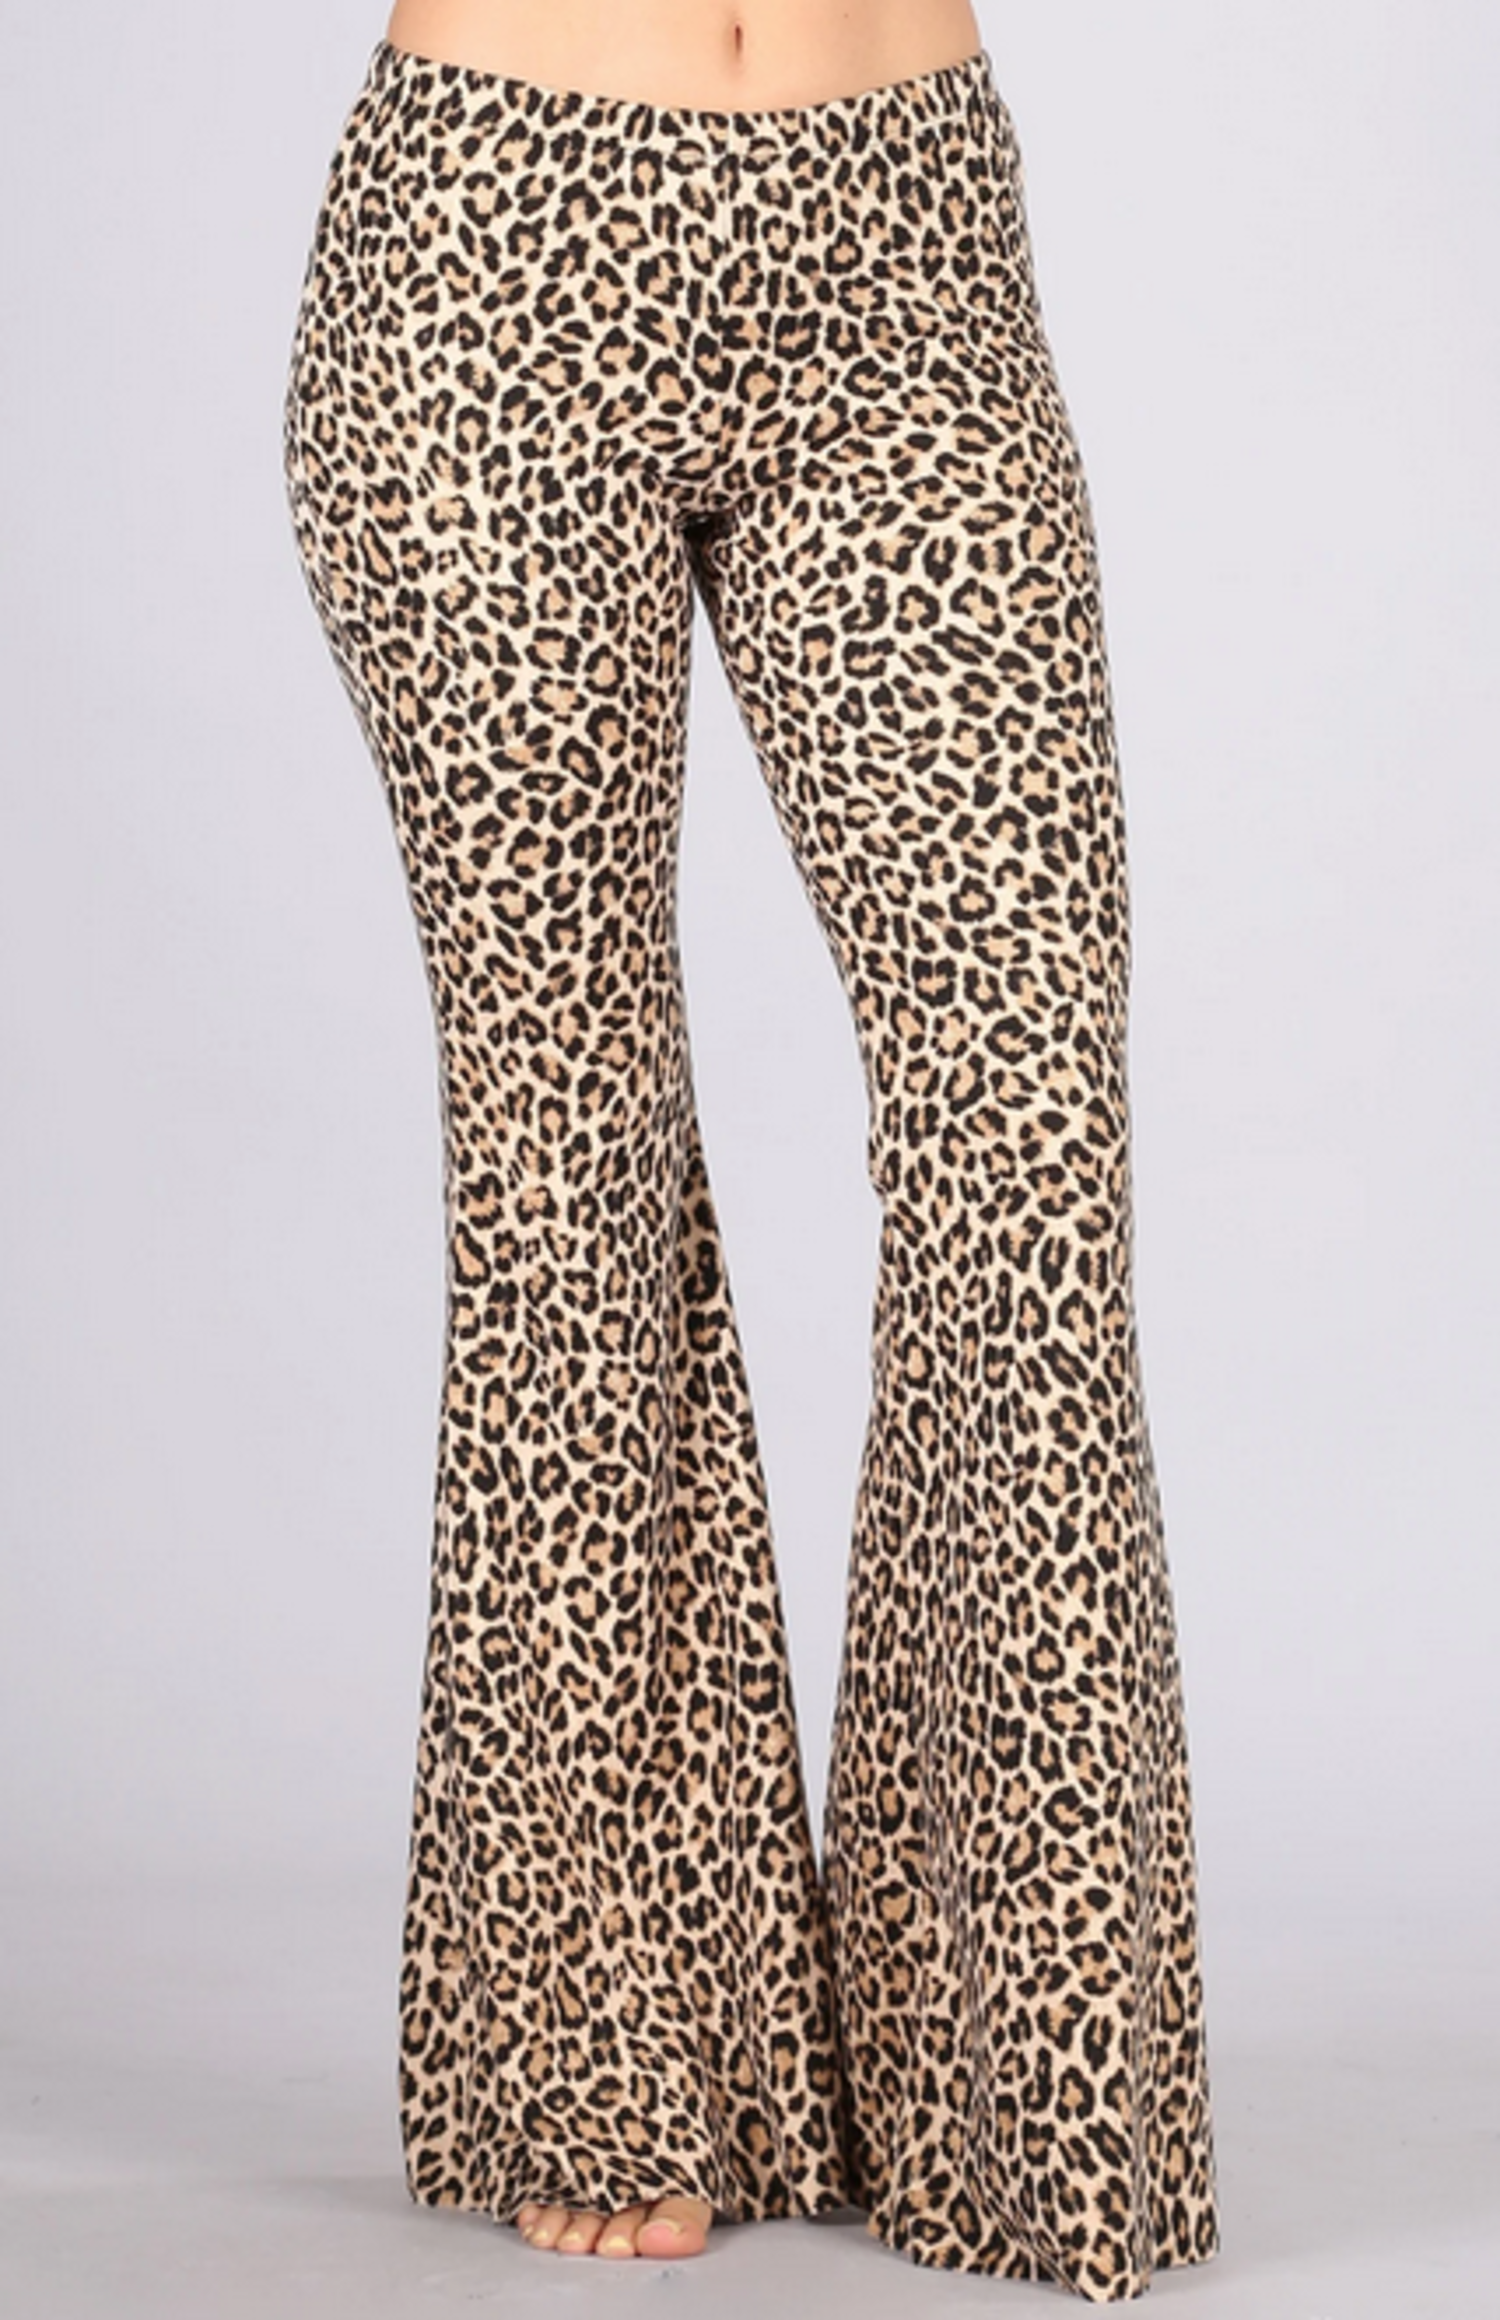 Leopard Print Velour Bell Bottoms | No Rules Fashion - No Rules